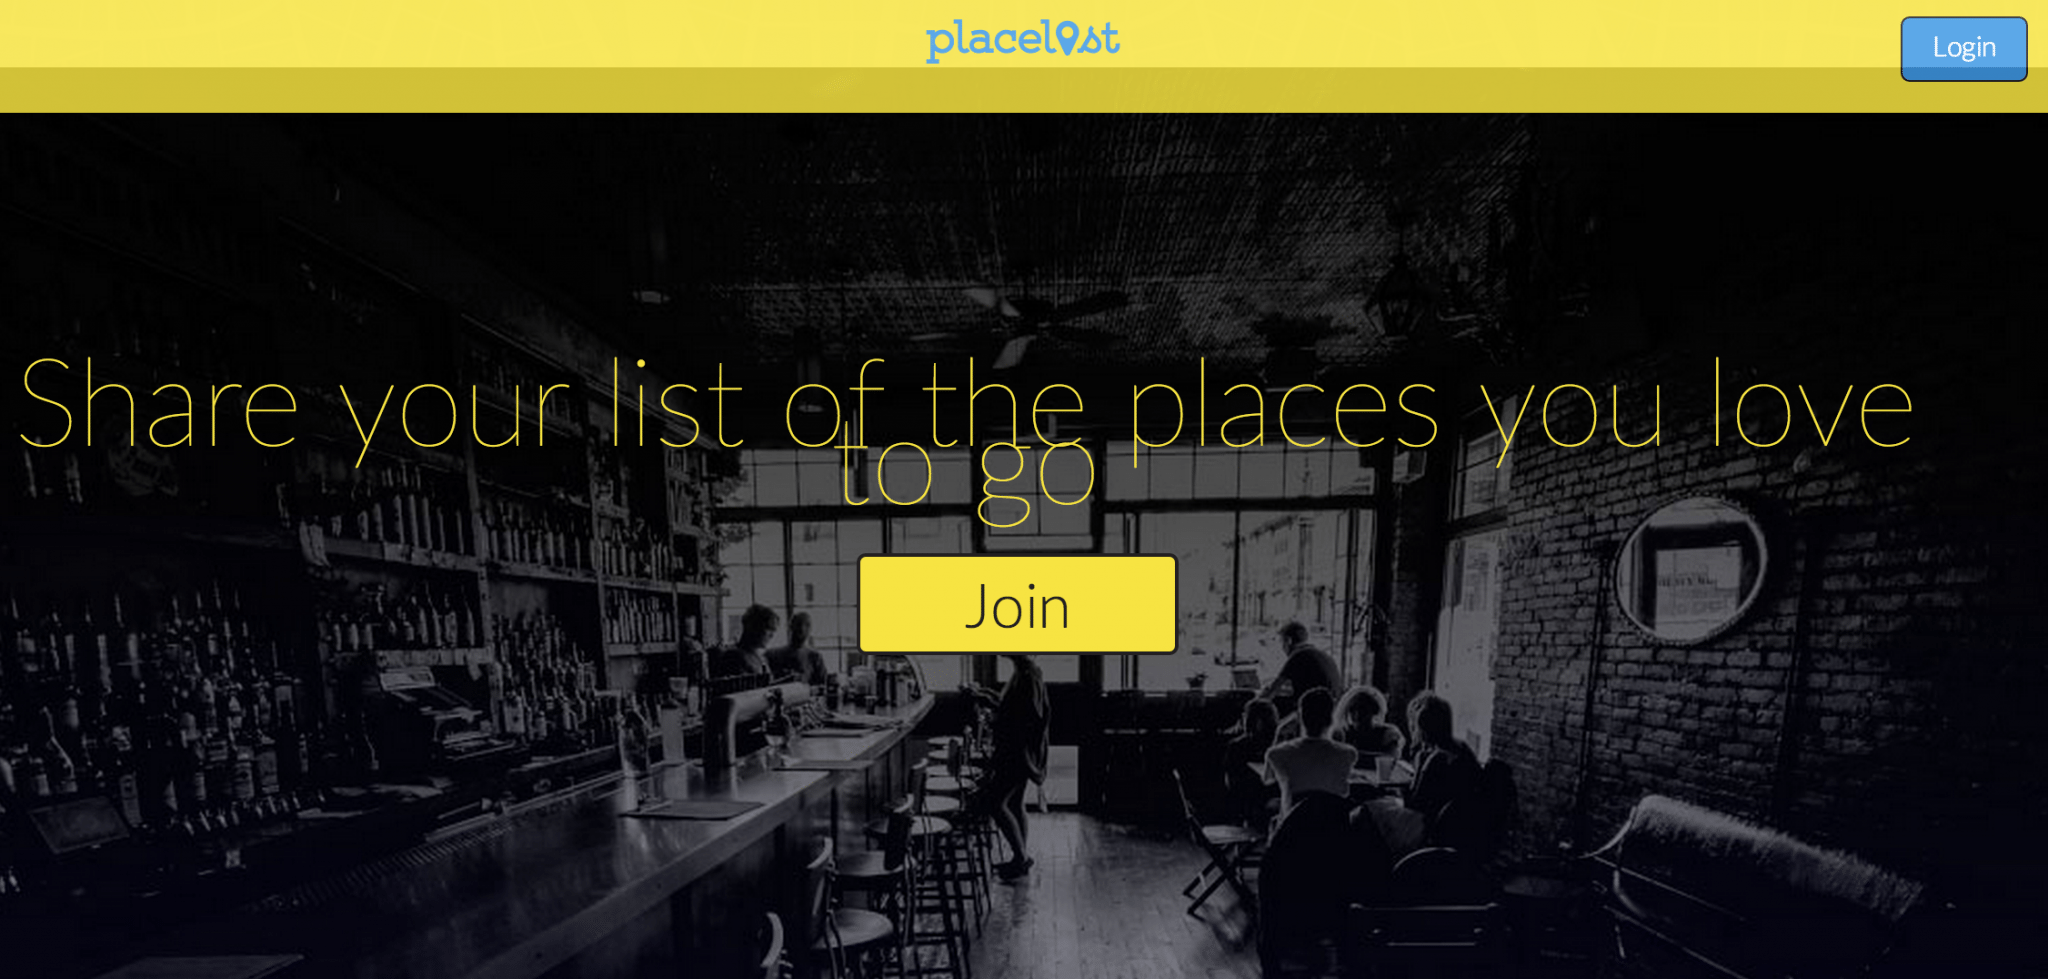 Placelist lets you share the list of places you love to go.